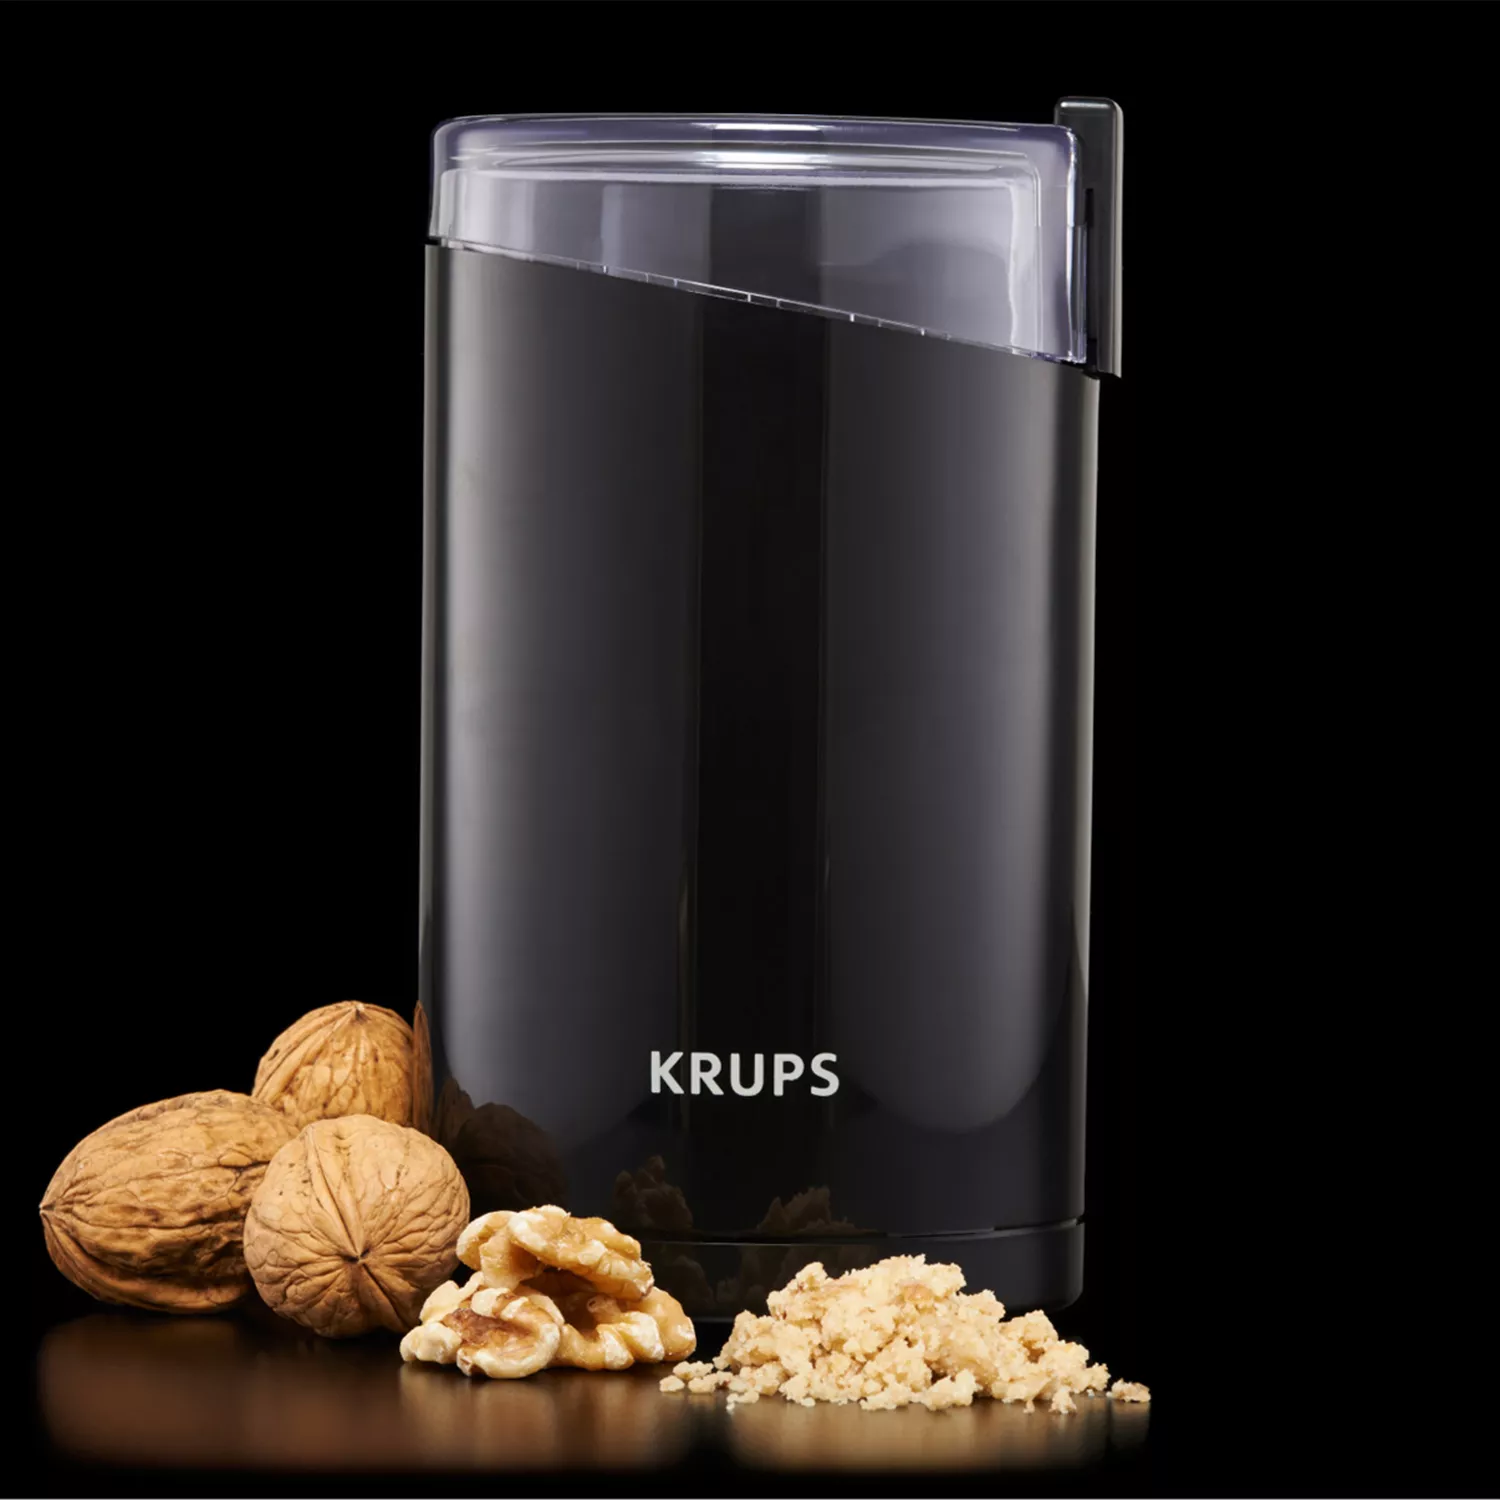 Grind coffee, spices, nuts, and more with this KRUPS electric